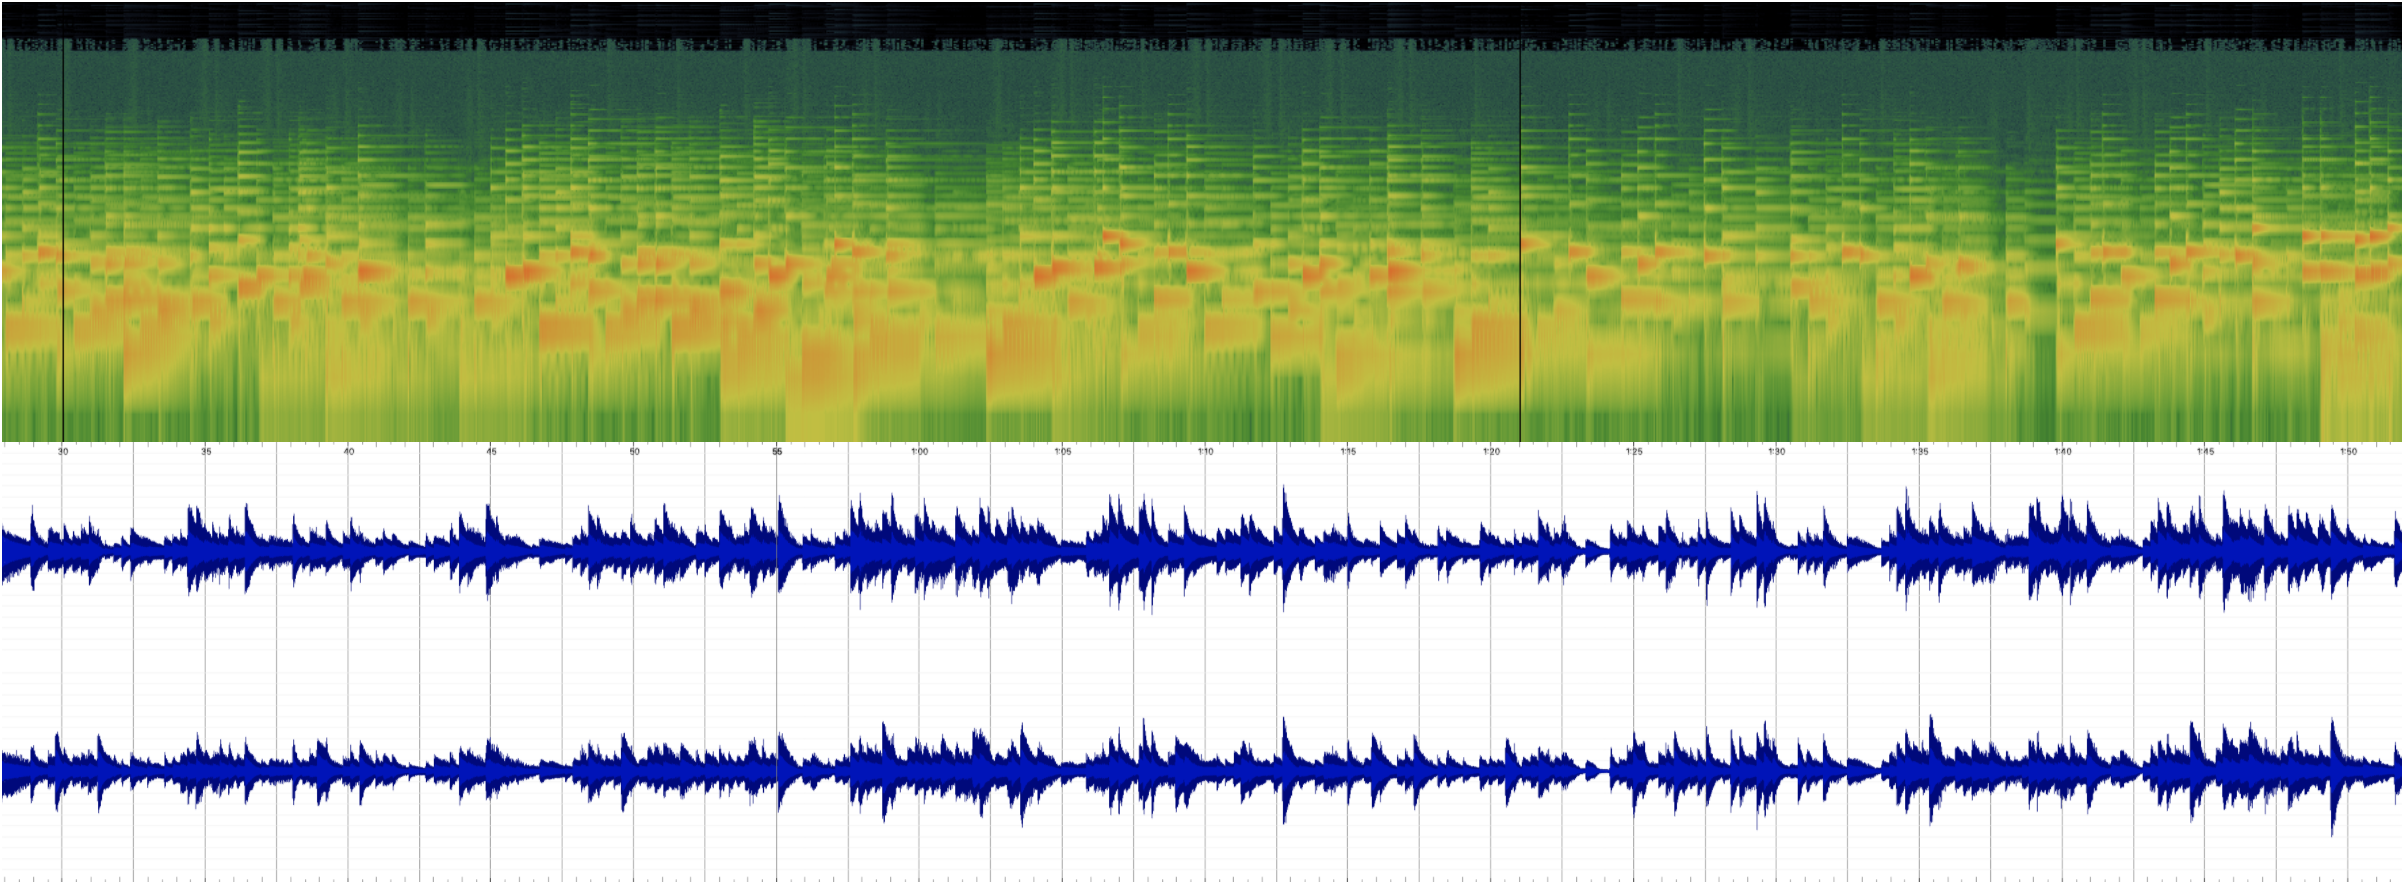 Spectrogram and waveform preview for Air by Yakov Golman